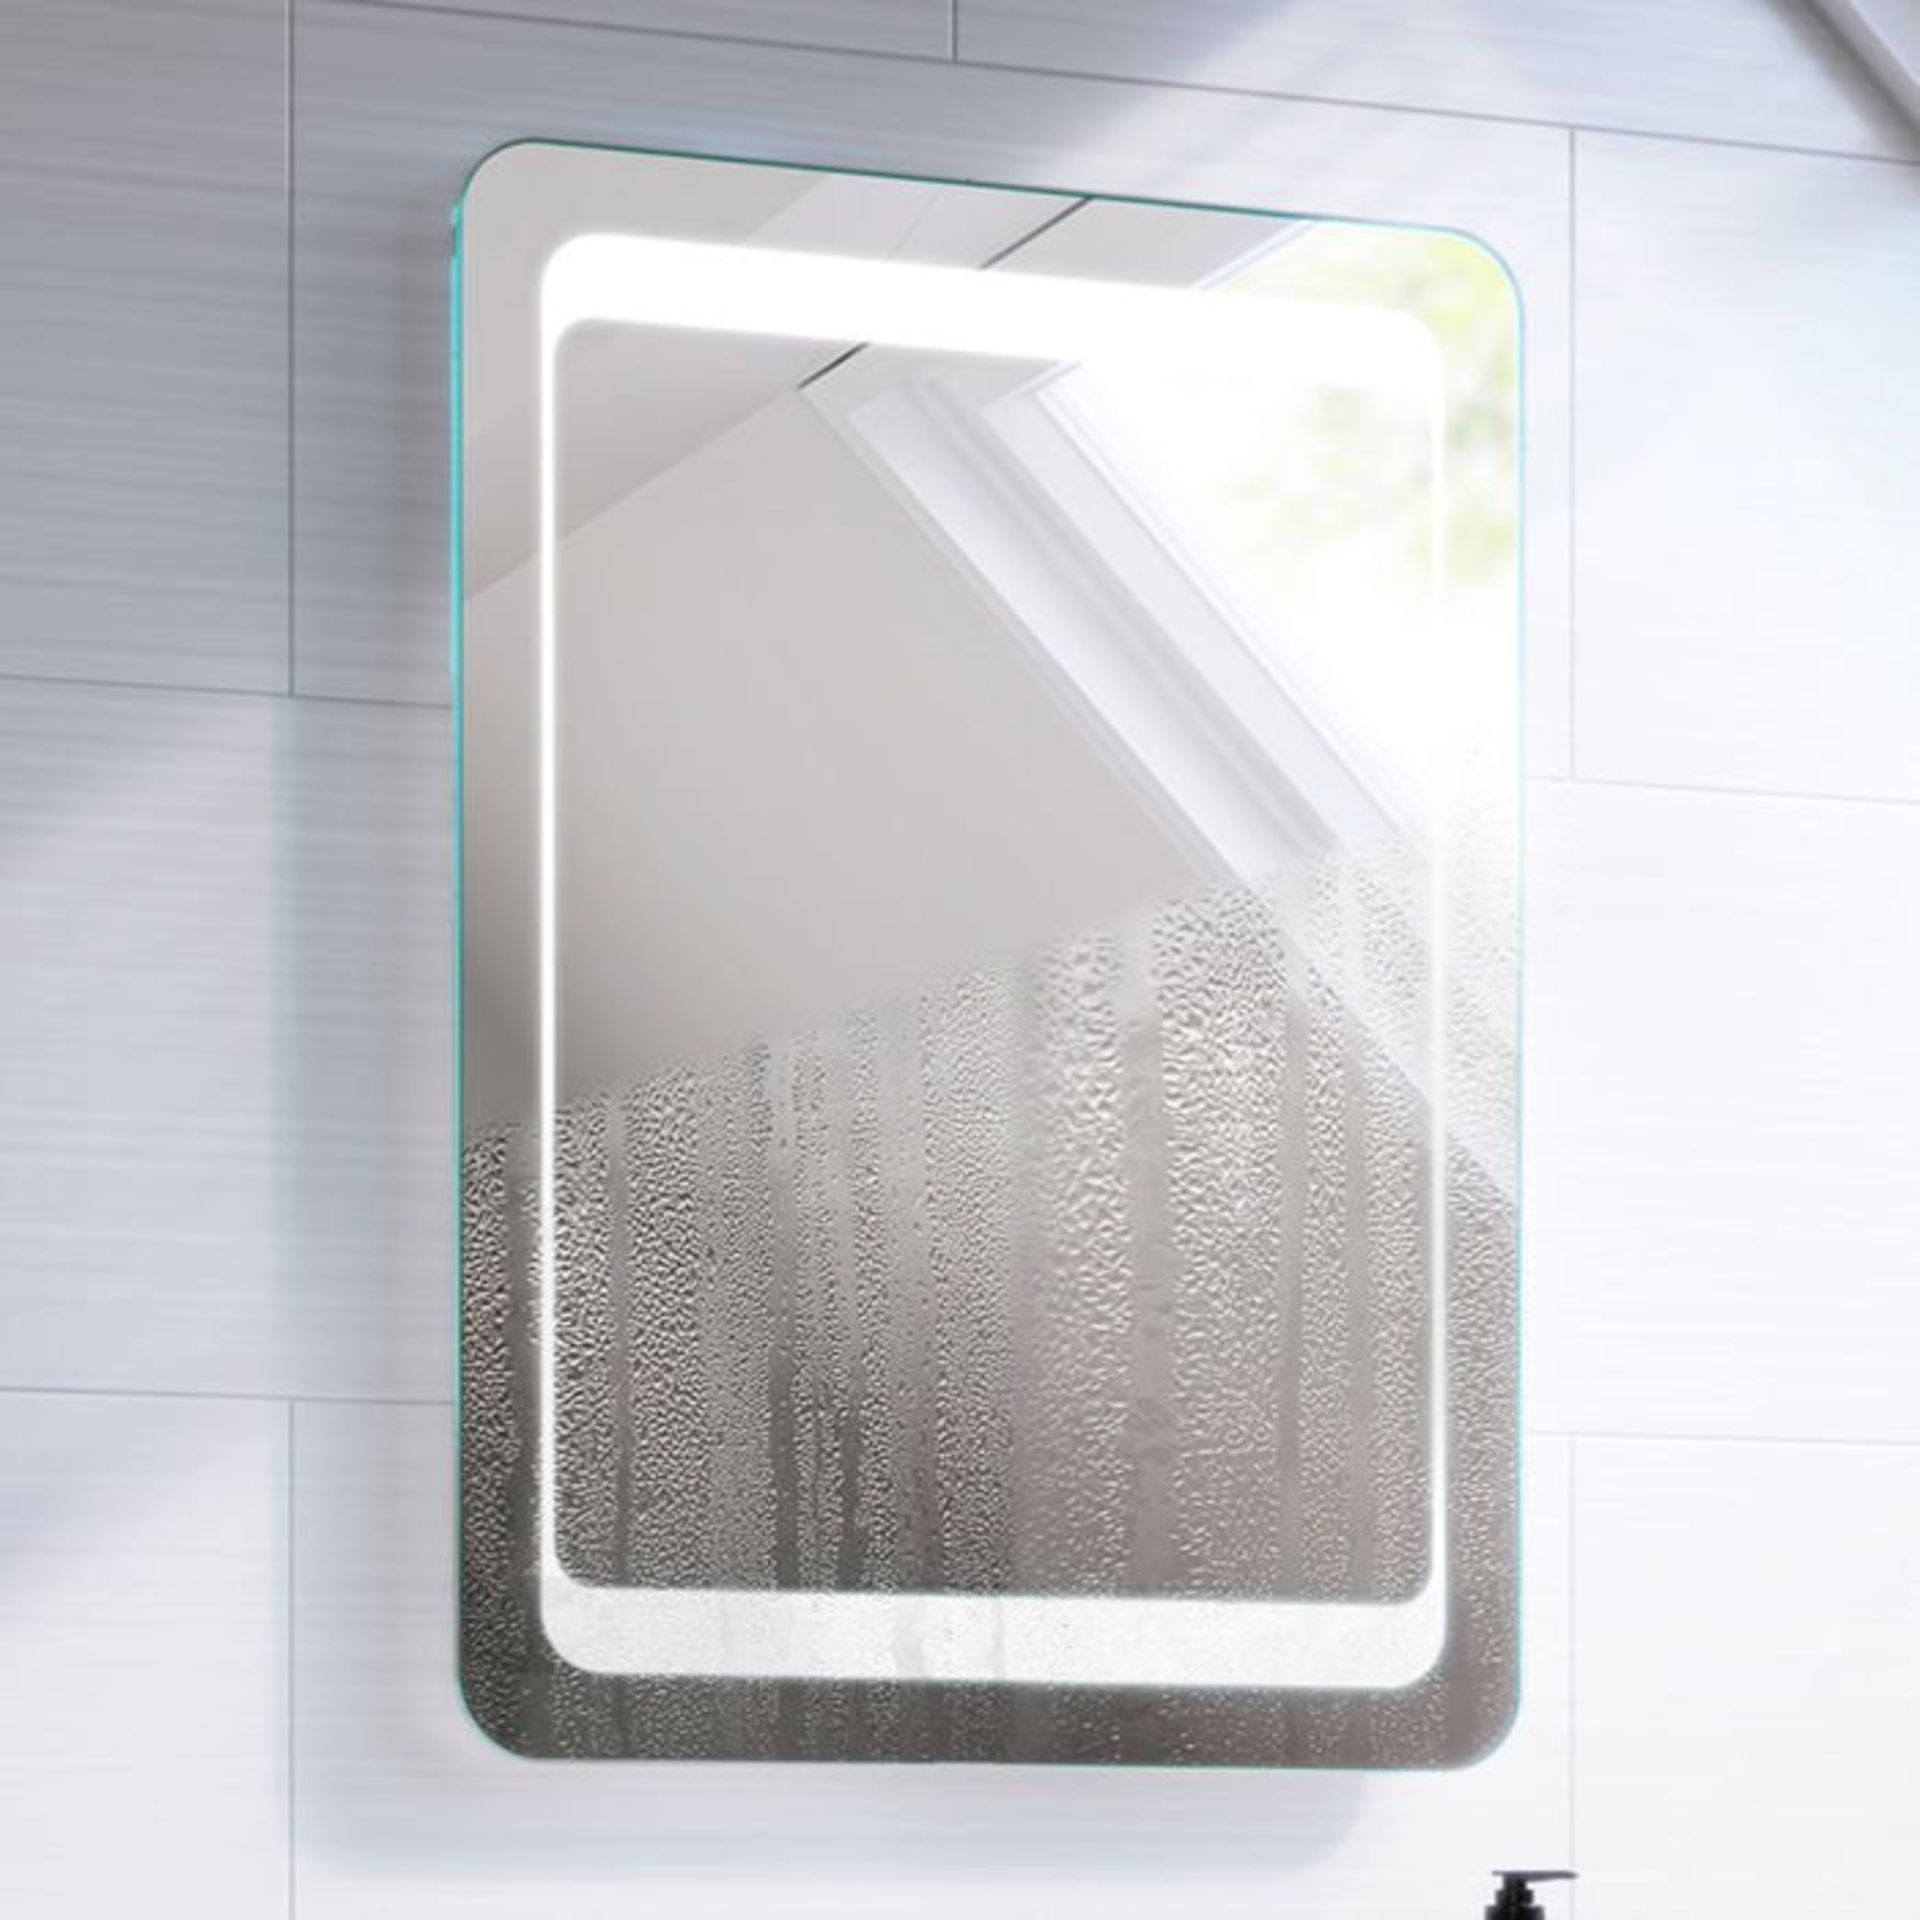 (Y29) 700x500mm Quasar Illuminated LED Mirror. RRP £349.99. Energy efficient LED lighting with - Image 4 of 10